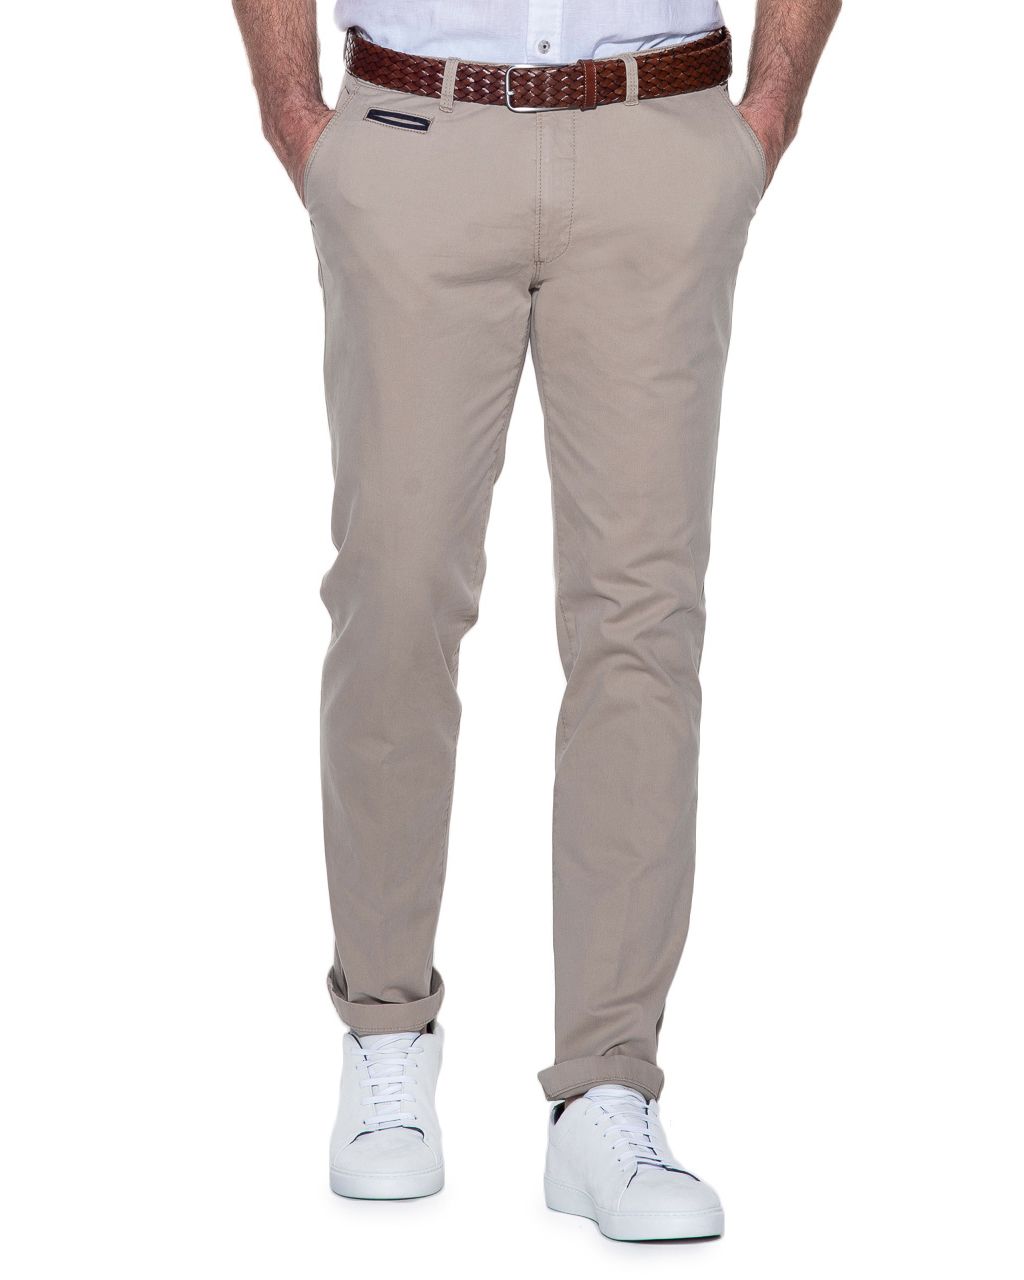 Campbell Classic Chino Beige 036406-810-24